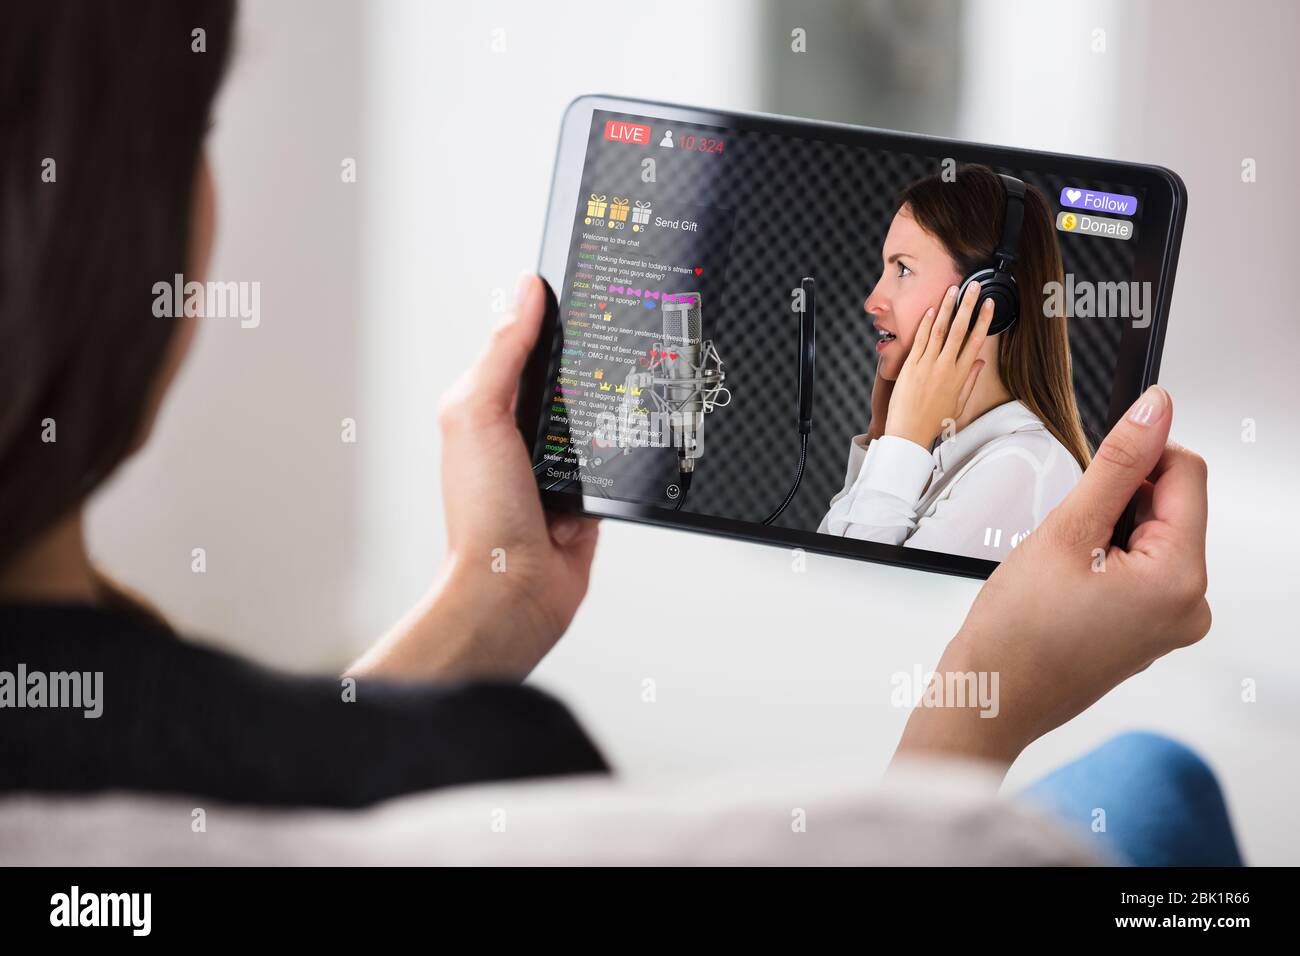 Streaming Live Music Video With Singer On Tablet Computer Stock Photo